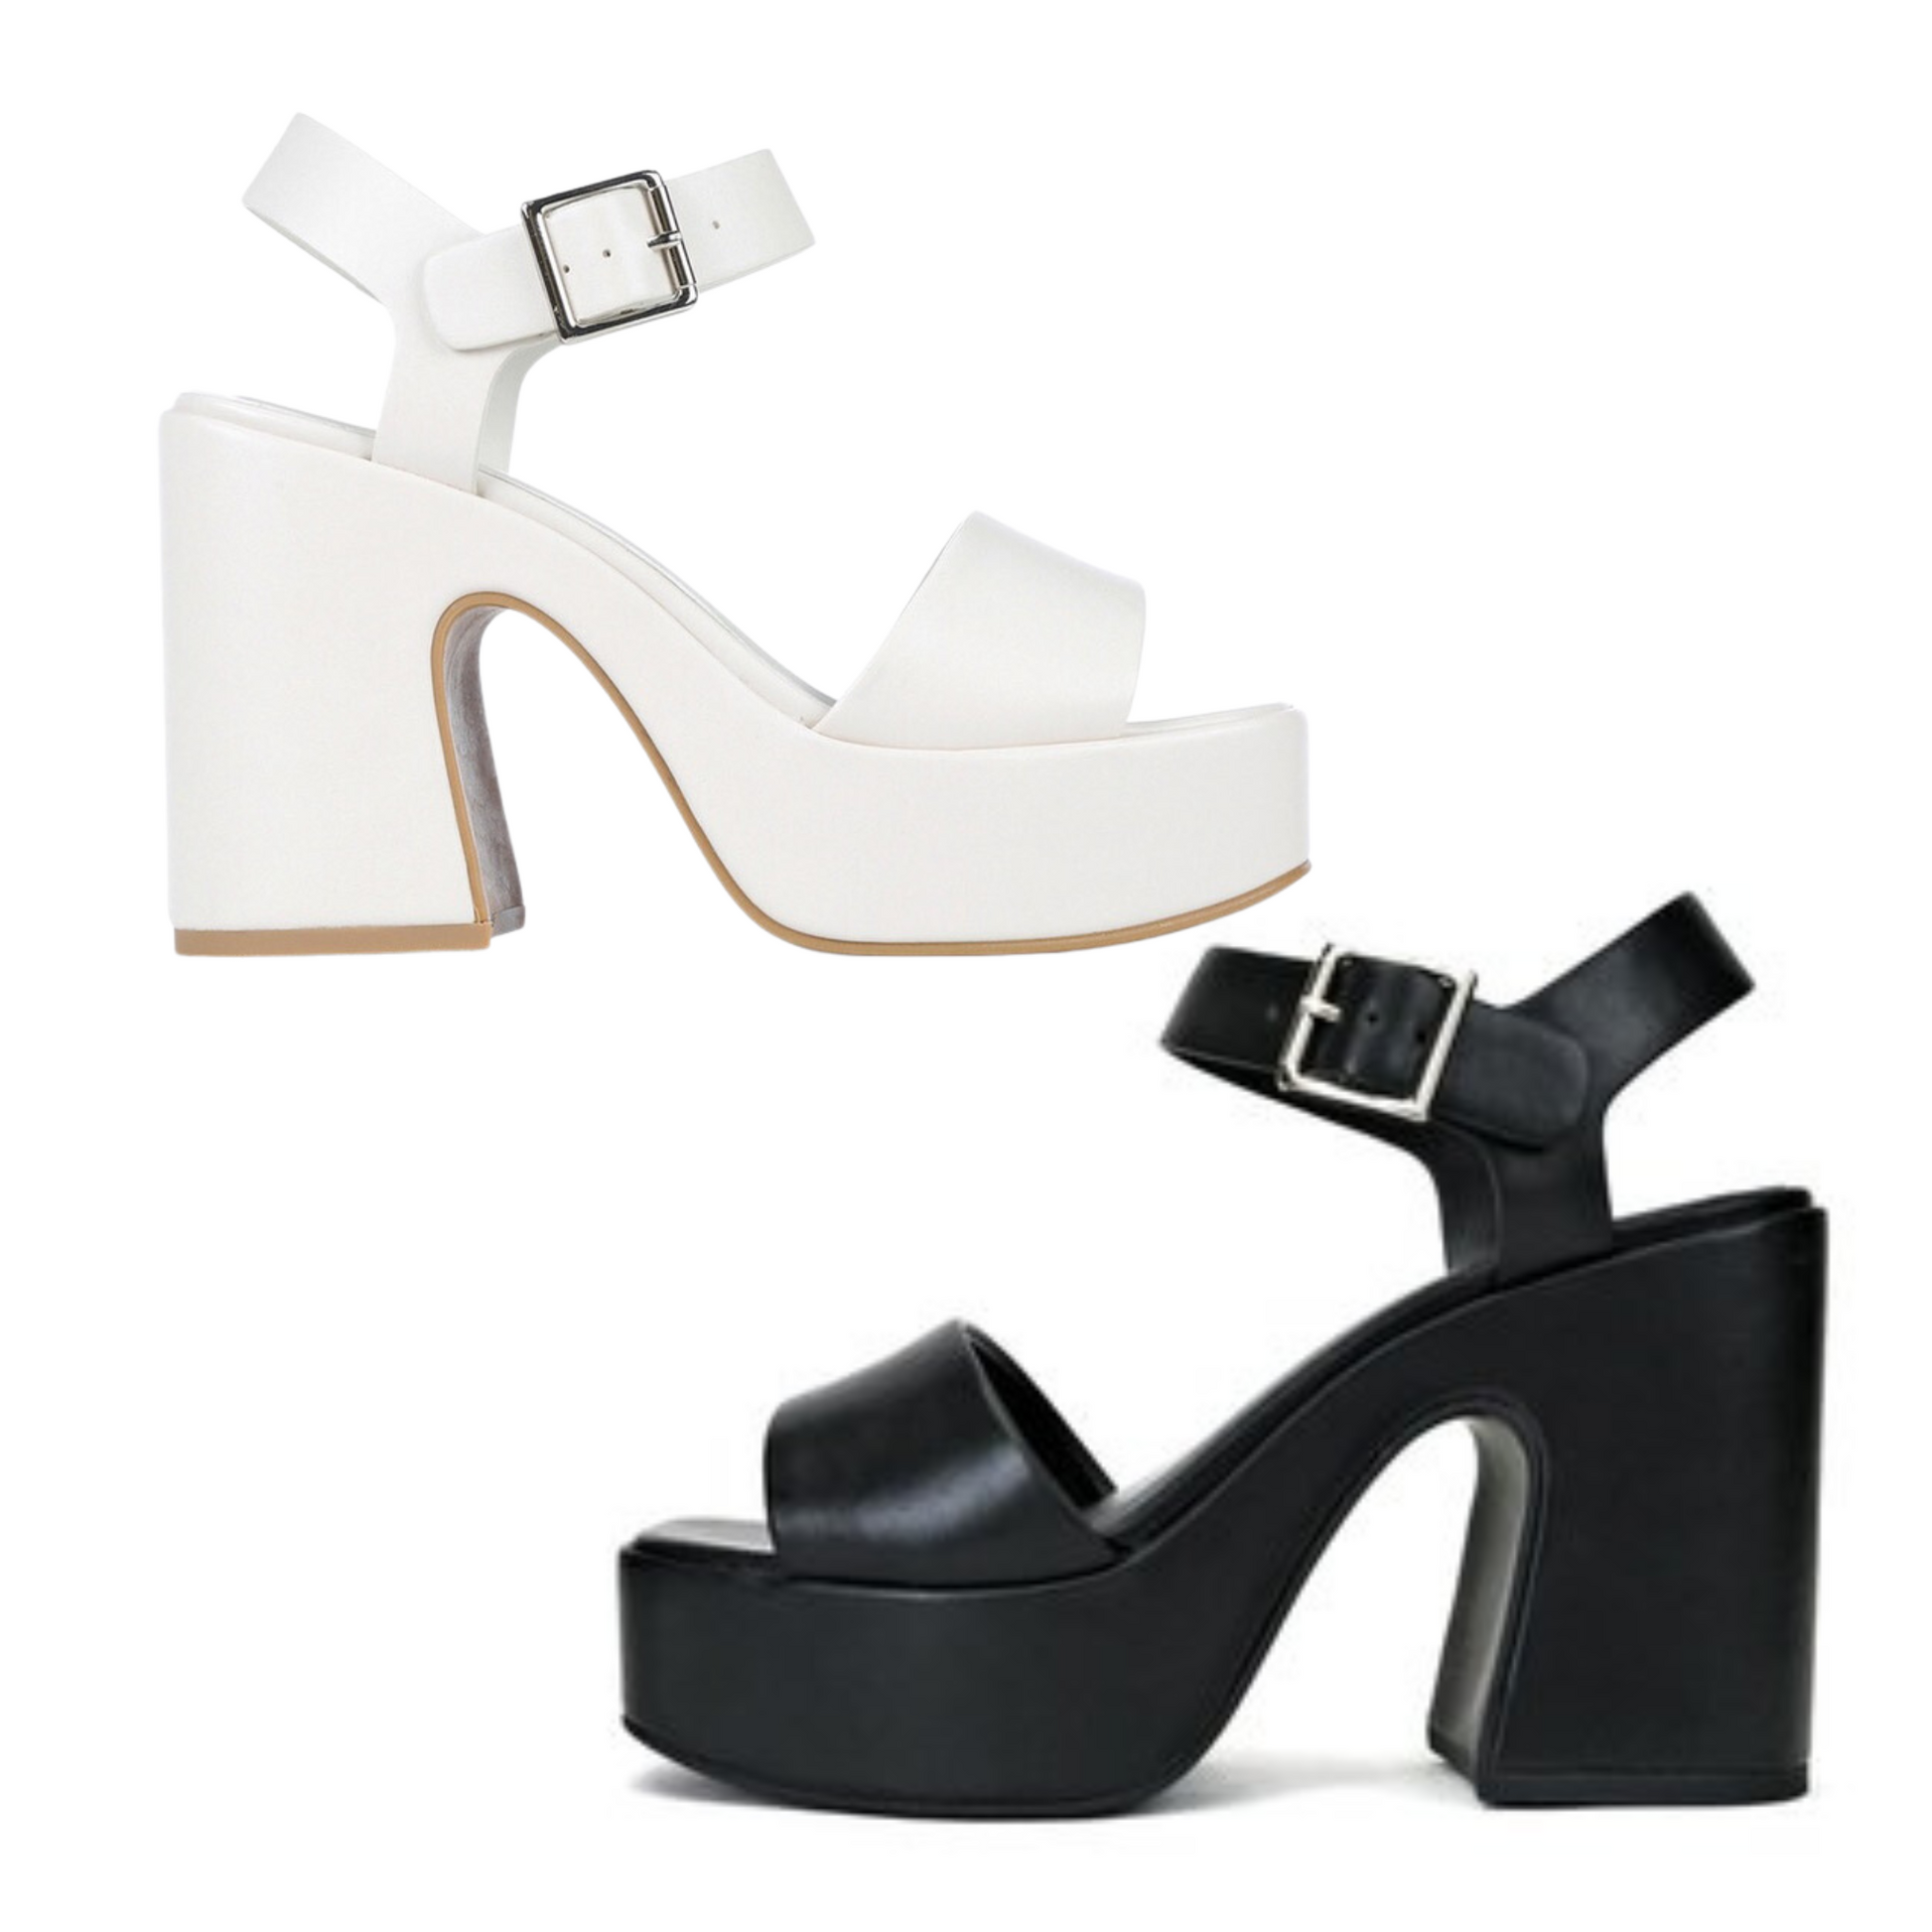 Strappy wedge heel from Soda. Available in Black and Off white